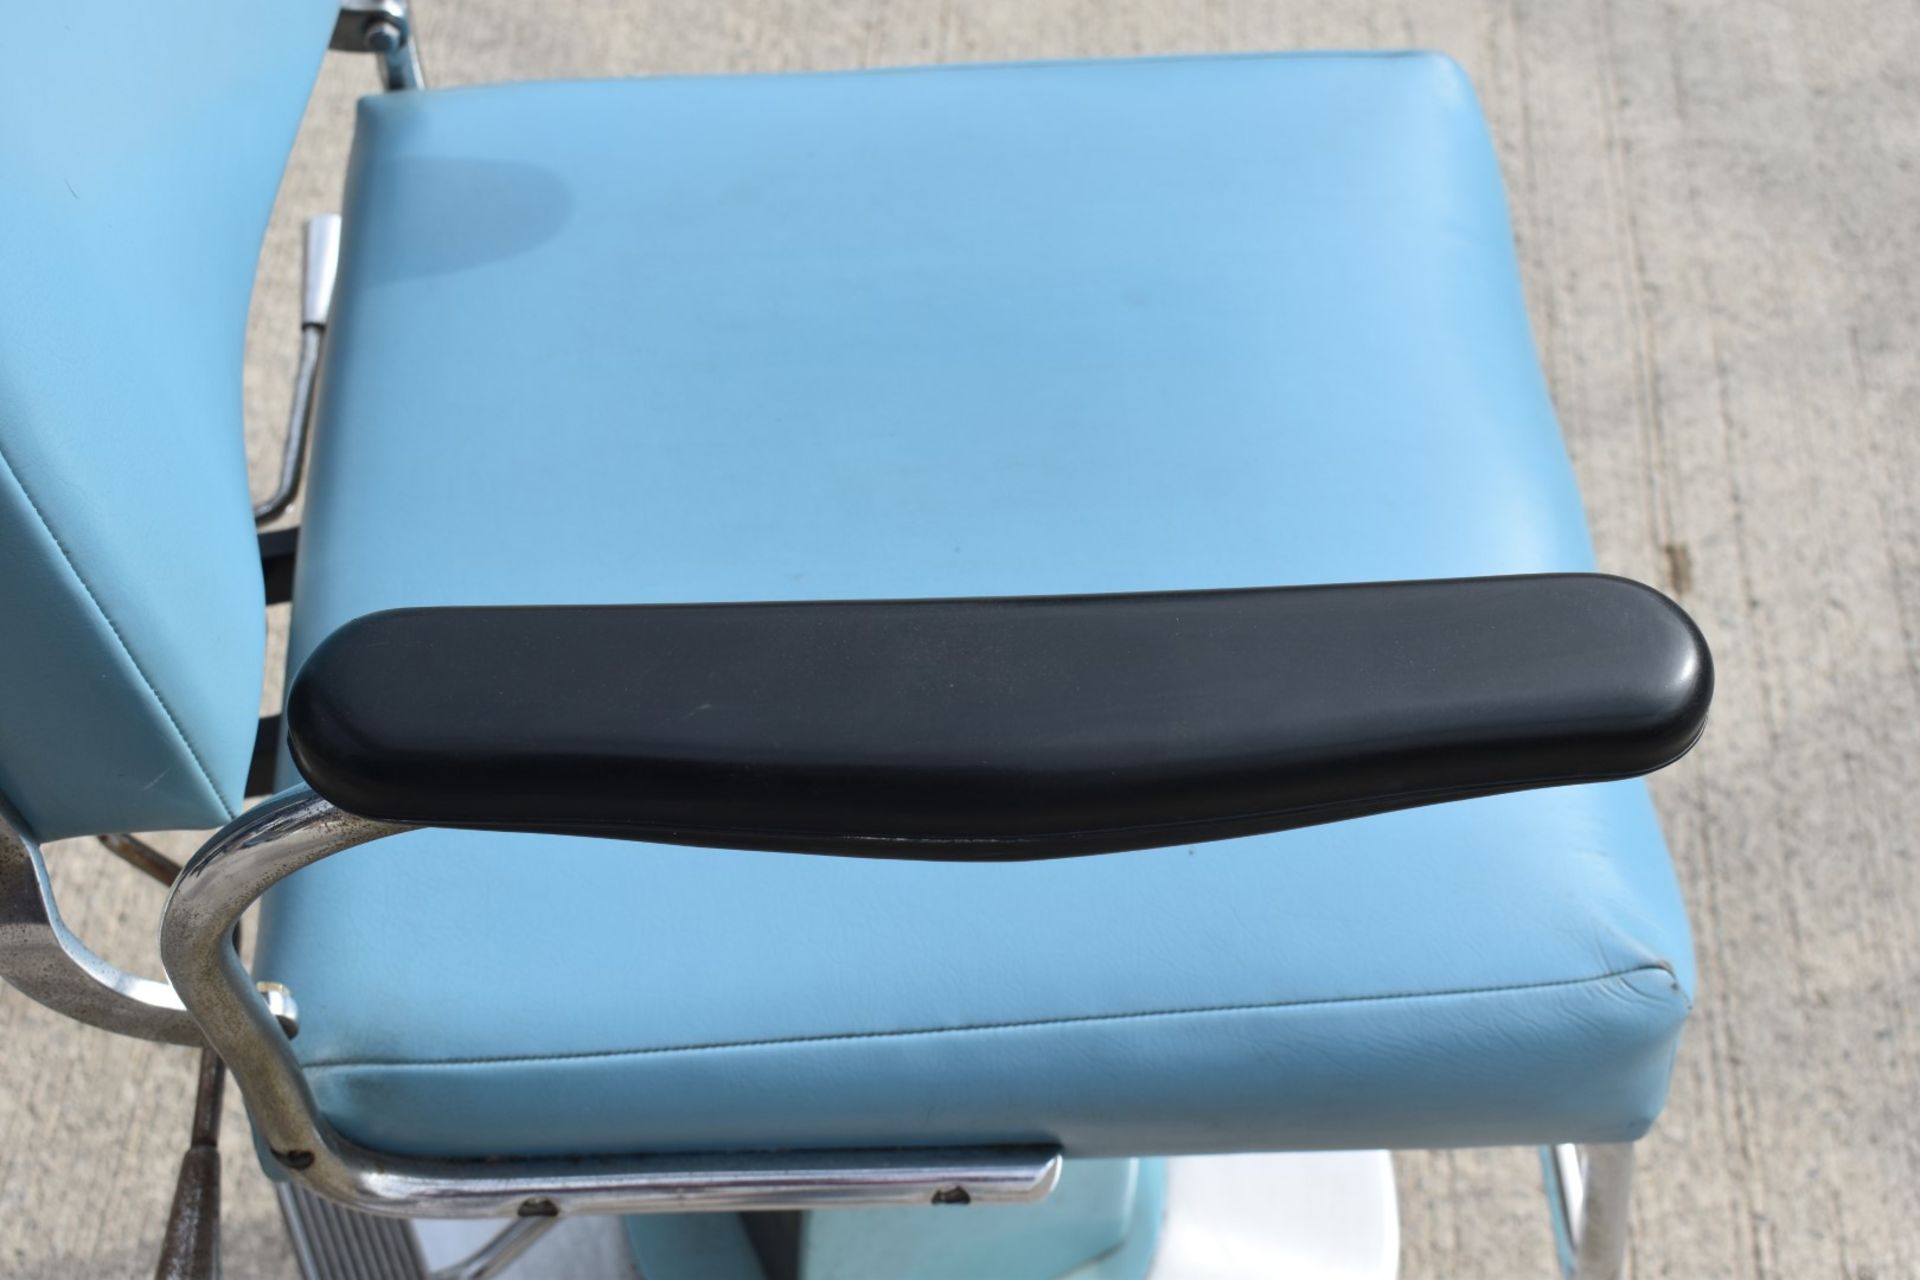 1 x Vintage F&F Koenigkramer Examination Chair With Gas Lift and Headrest - Removed From a Central - Image 7 of 12